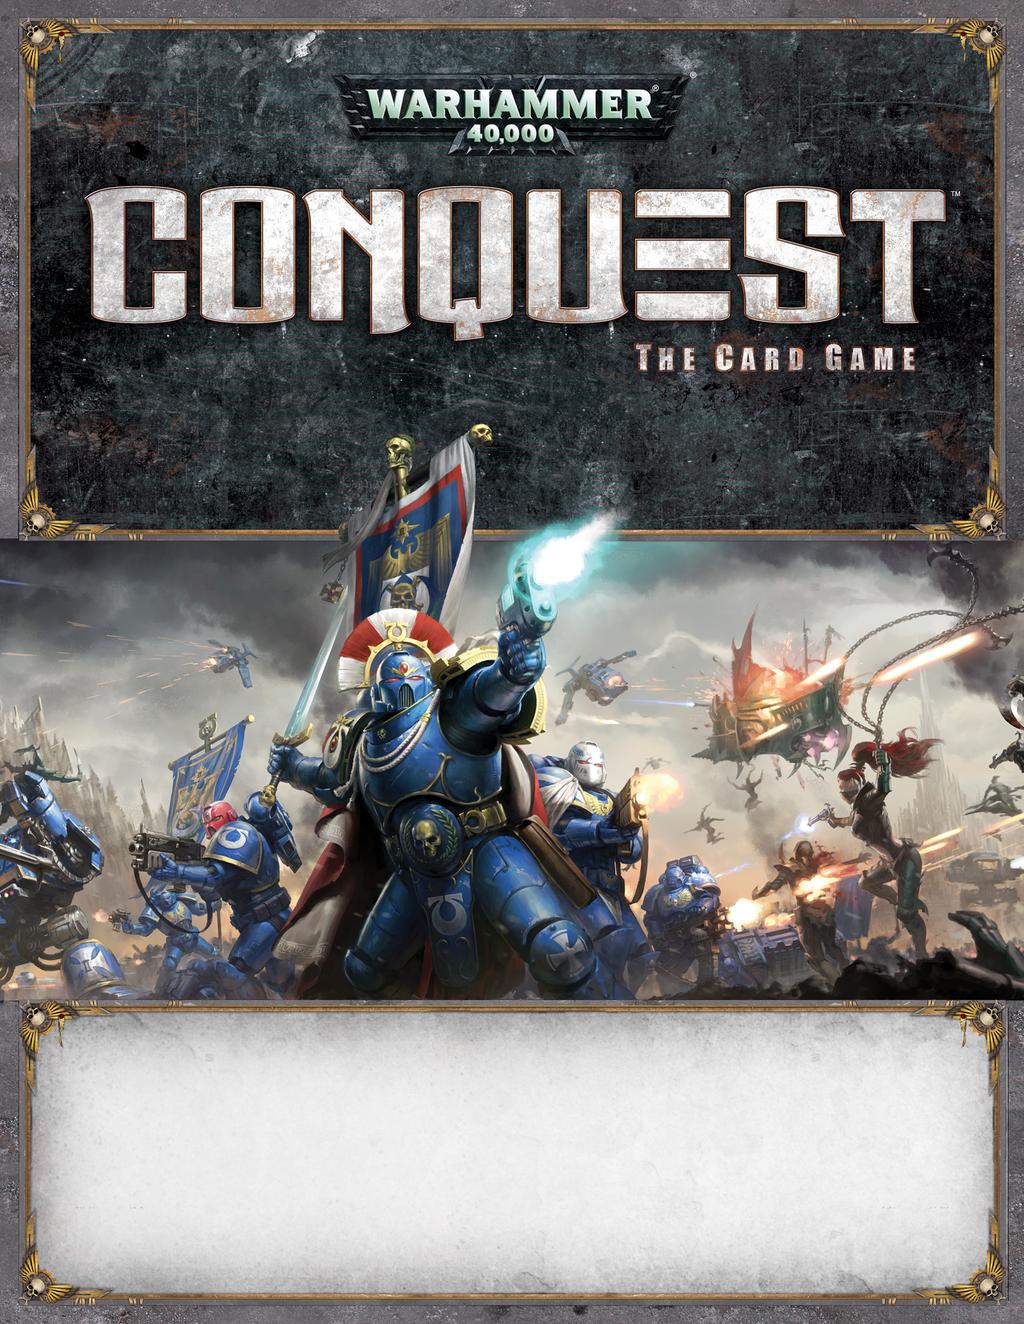 Frequently A sked Questions 1.2 October 1st, 2015 This document contains card clarification, errata, rule clarifications, and frequently asked questions for Warhammer 40,000: Conquest.